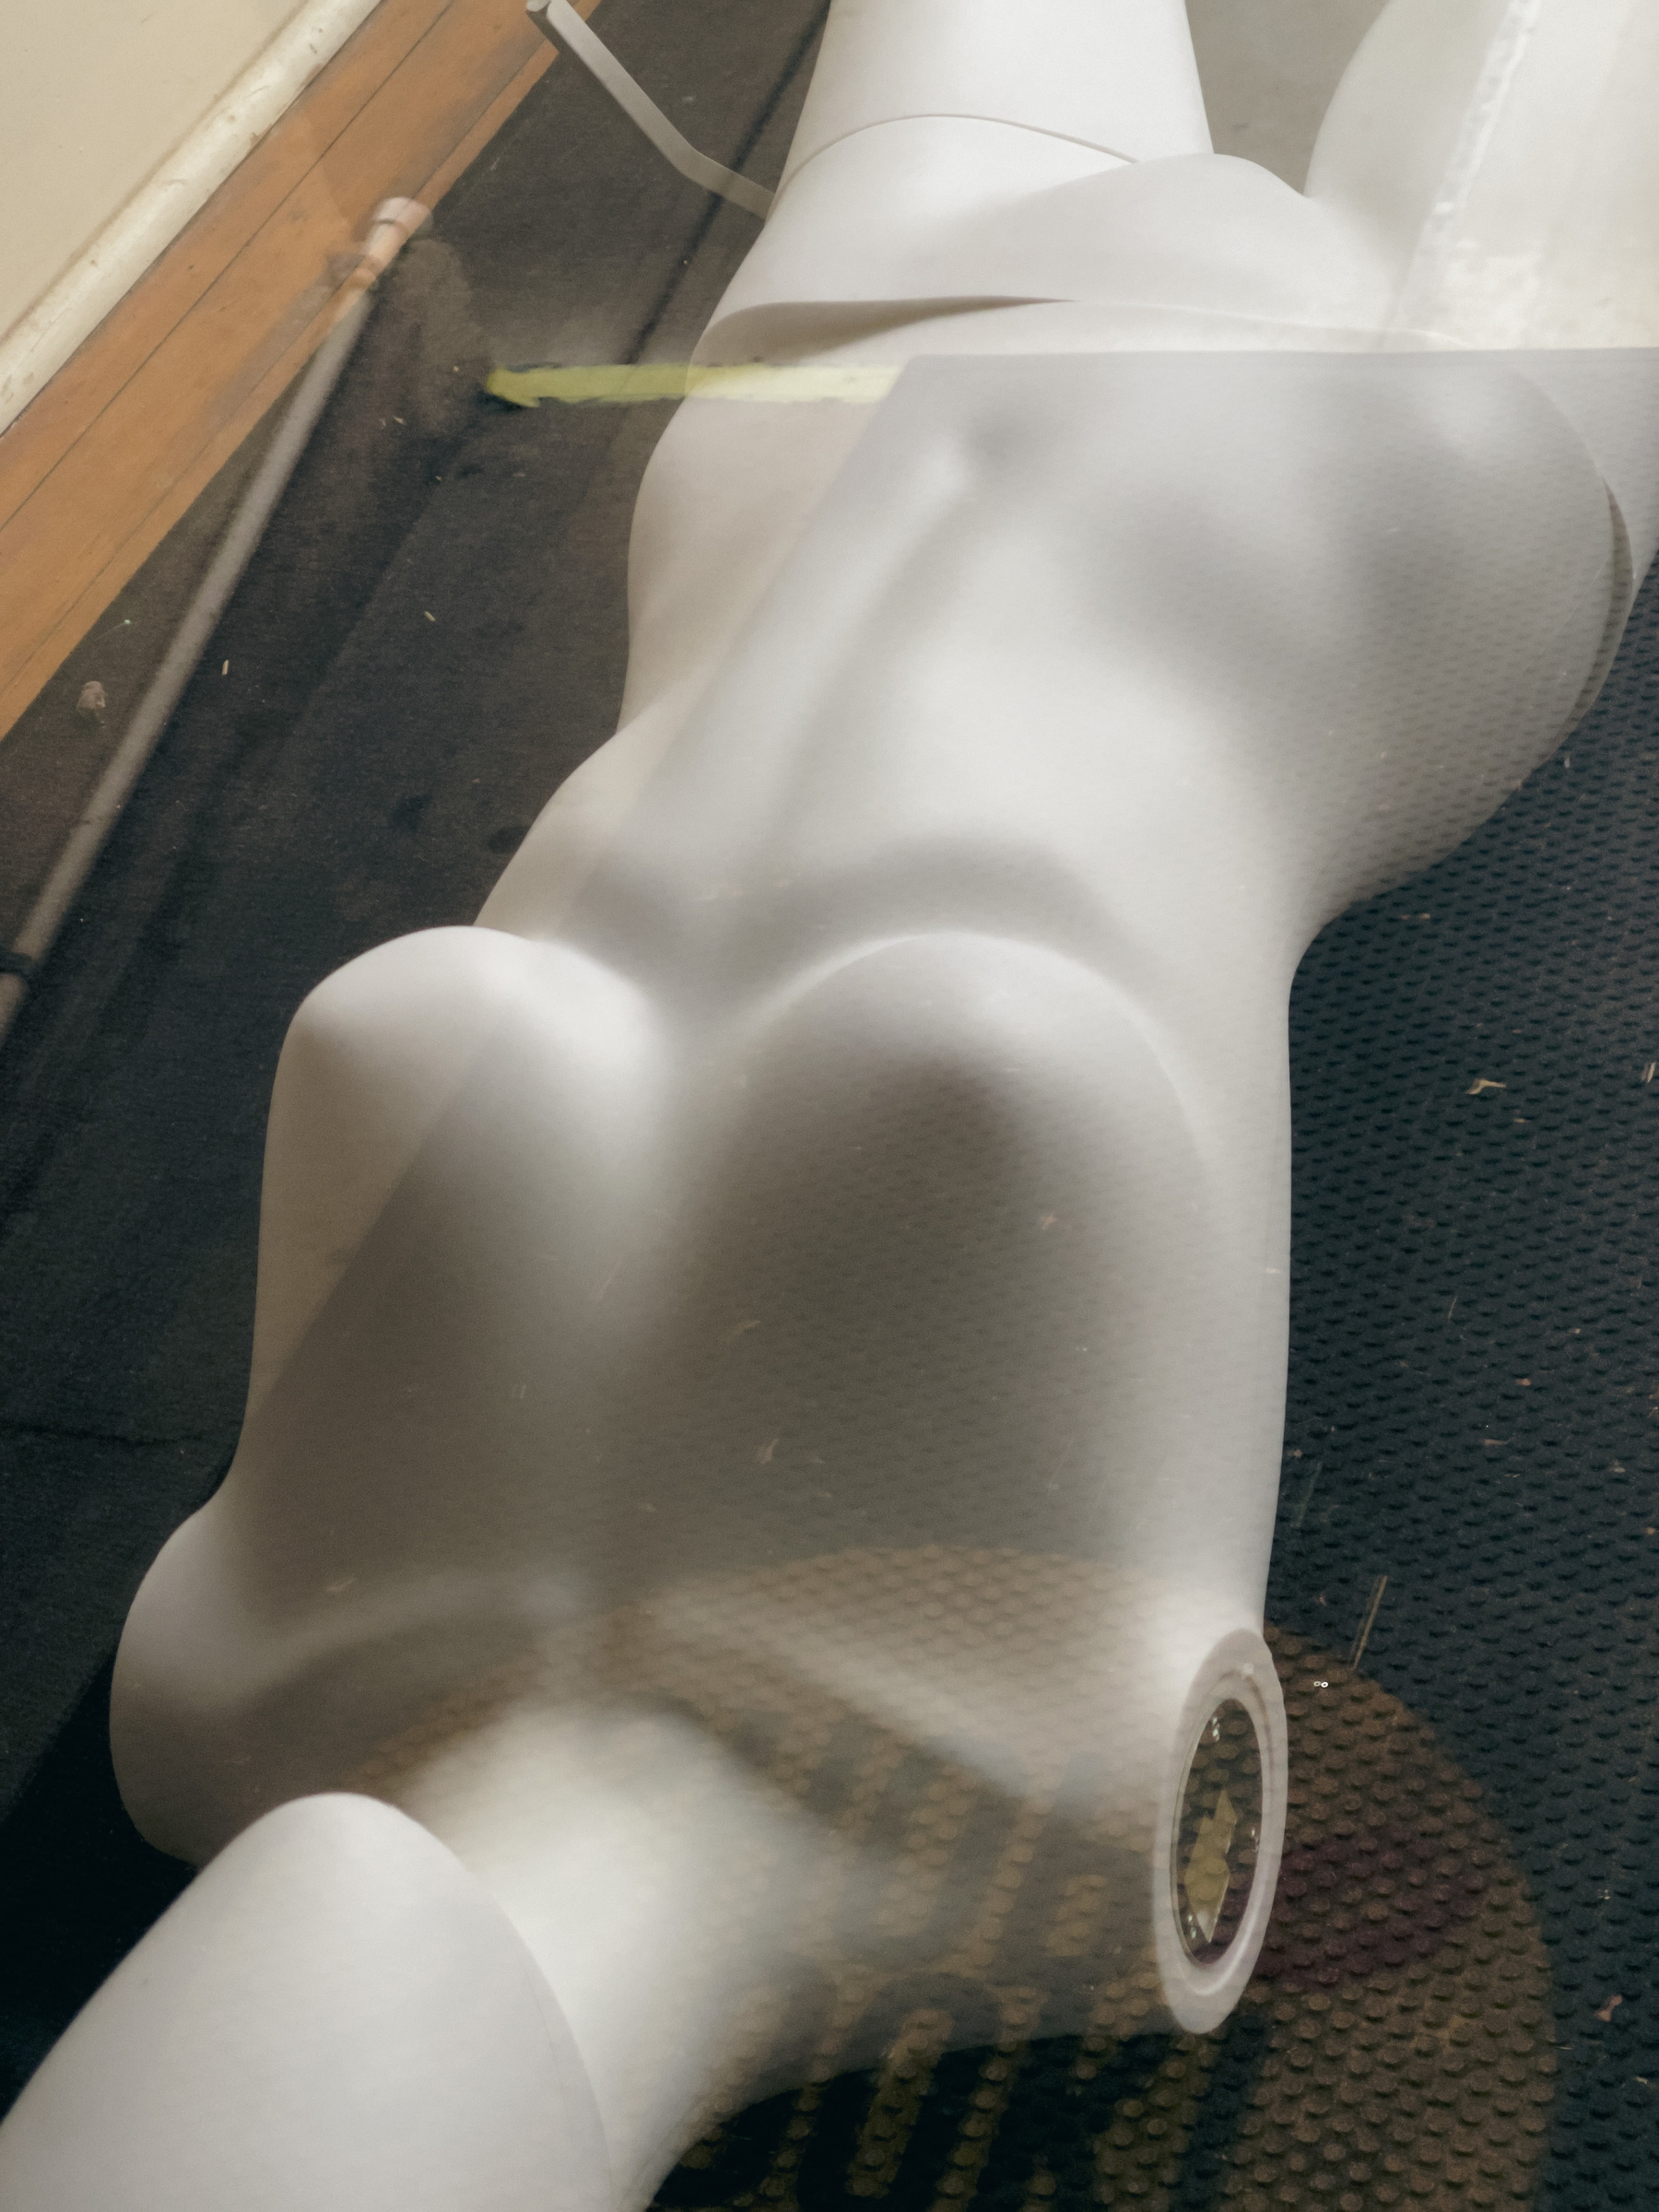 Armless female mannequin form in a shop window.